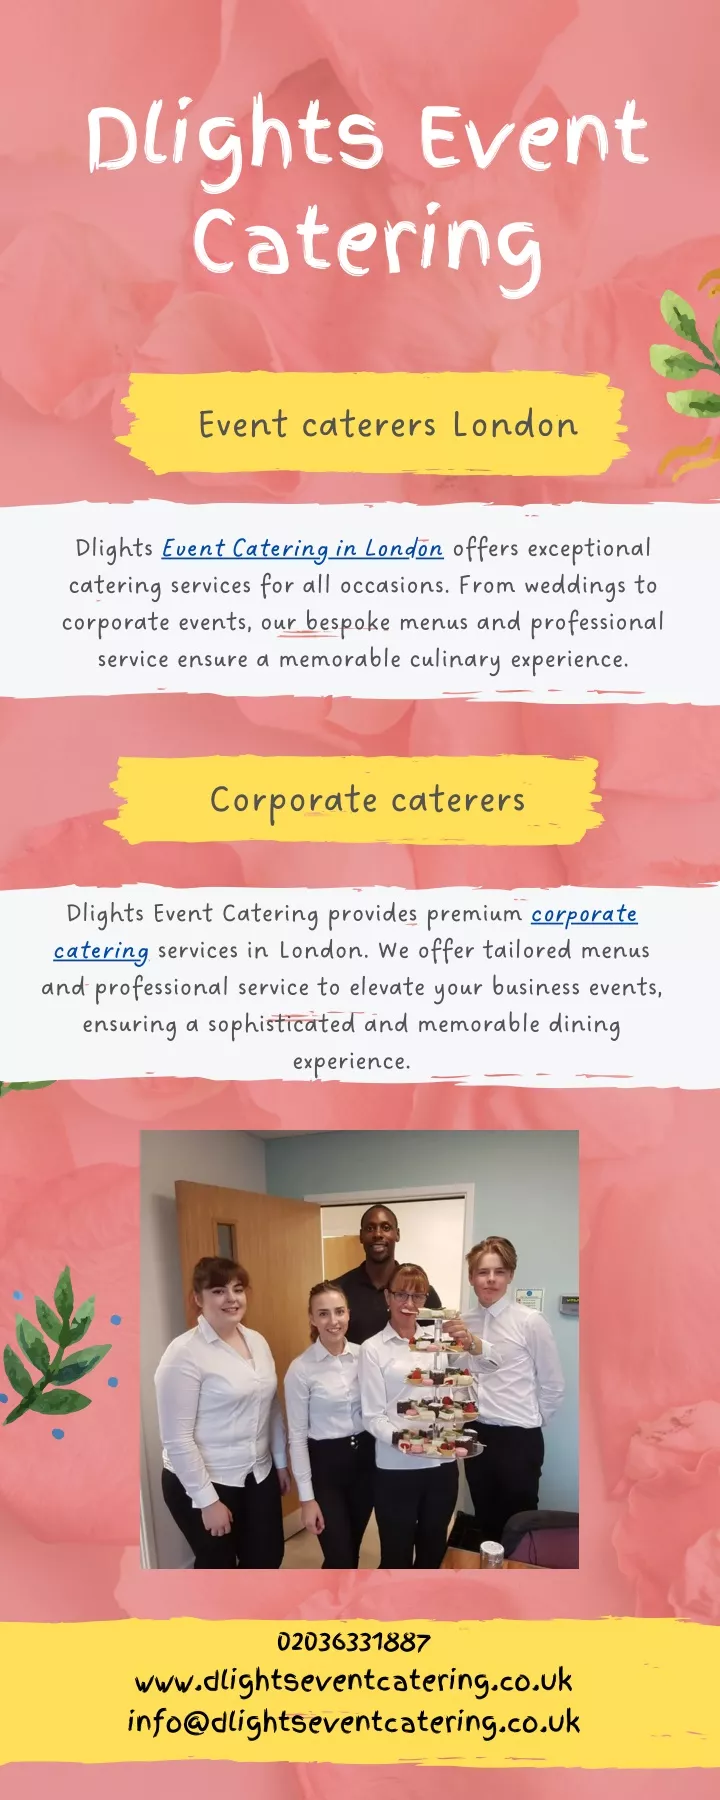 PPT - Event caterers London at Dlights Event Catering PowerPoint Presentation - ID:13305696